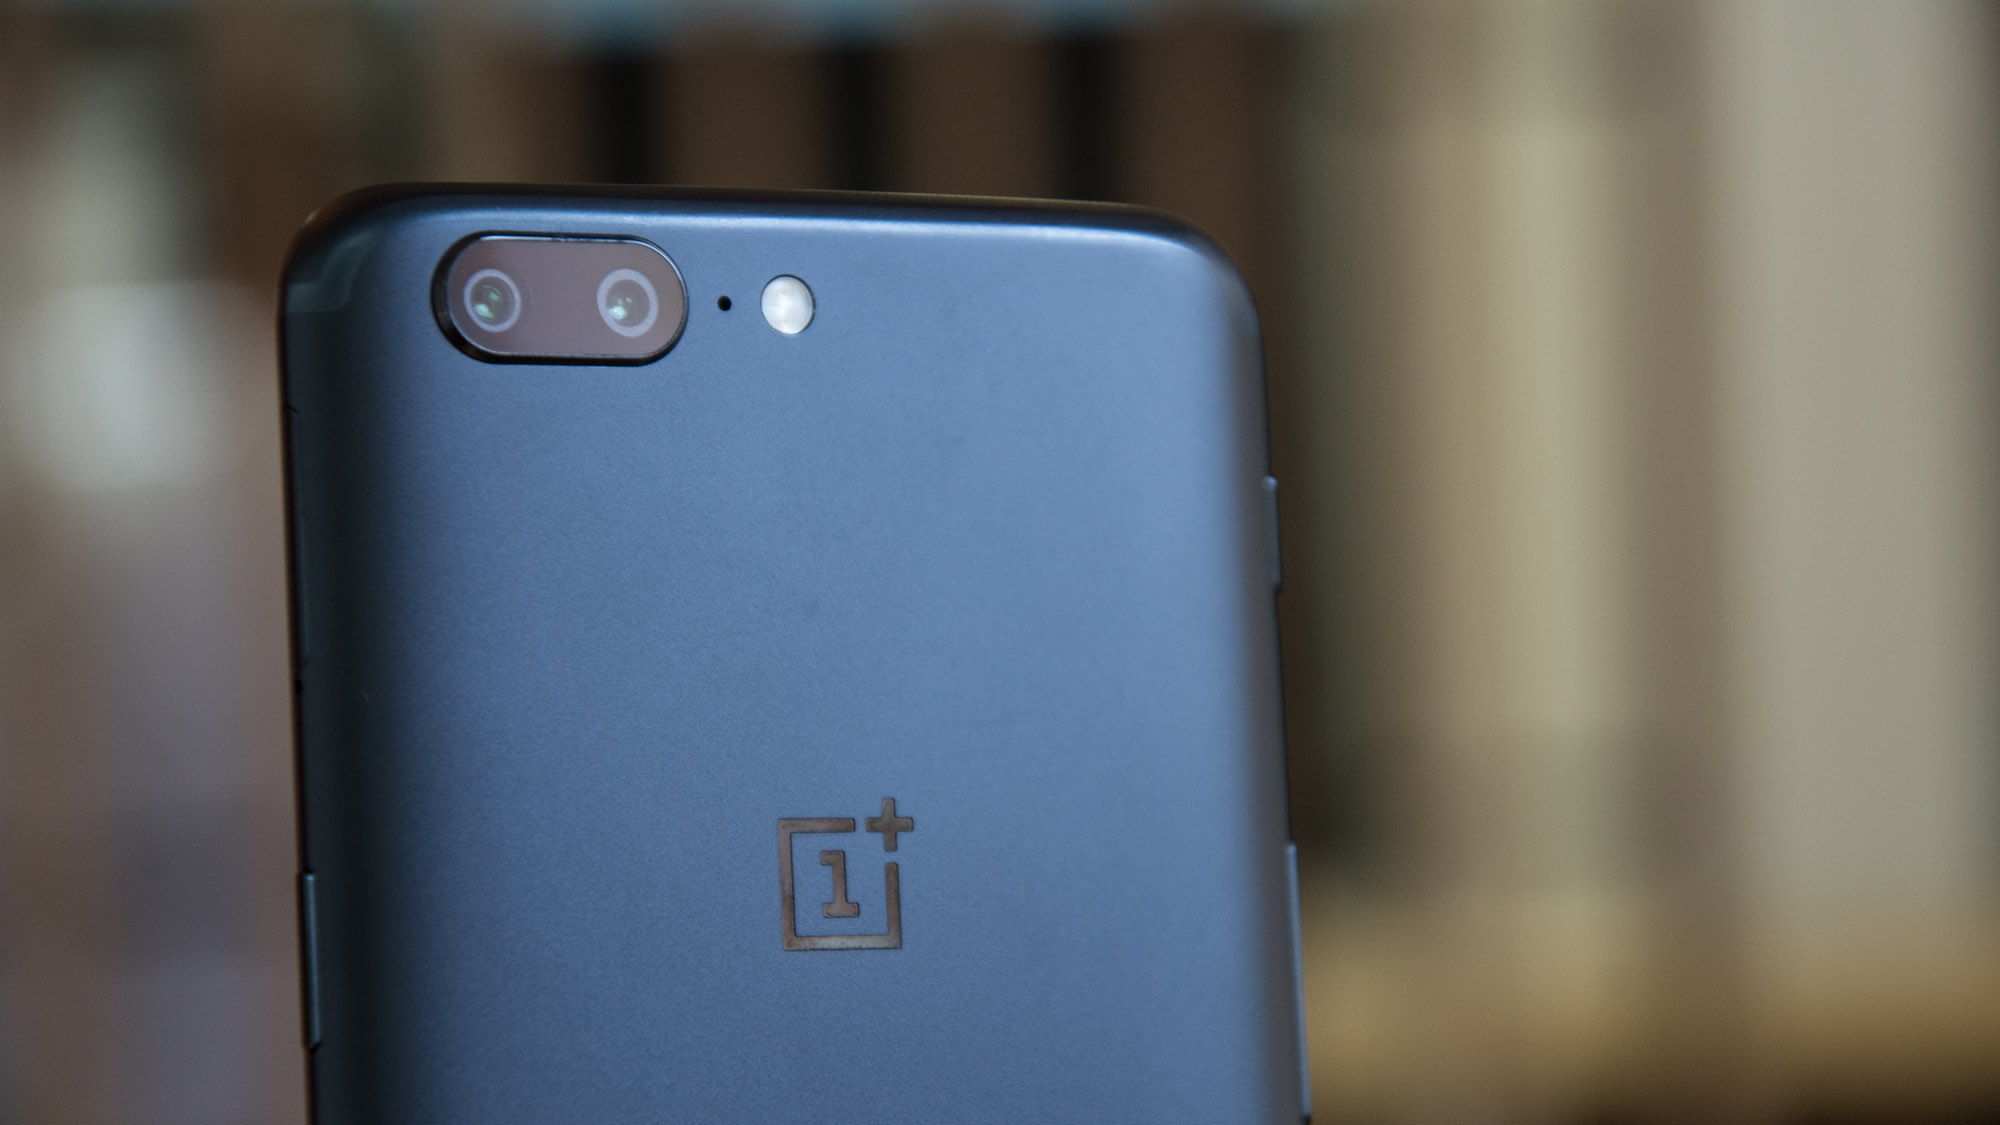 OnePlus Rolls out OxygenOS 4.5.8 update to OnePlus 5 1